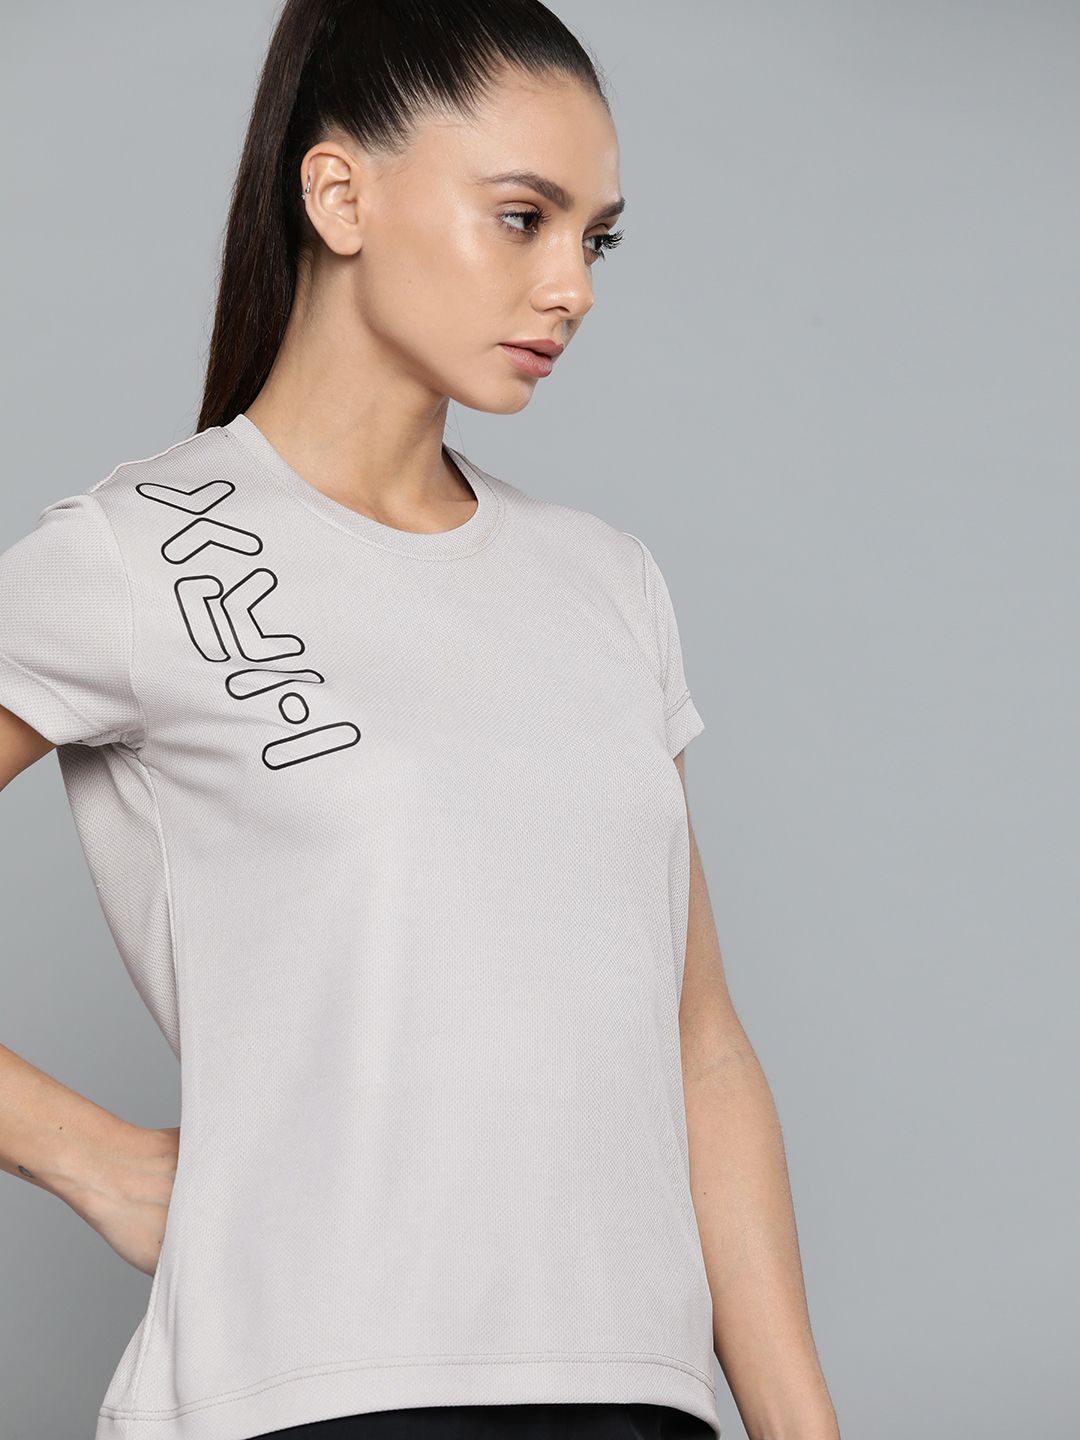 HRX By Hrithik Roshan Running Women Wet Weather Rapid-Dry Brand Carrier T-shirt Price in India